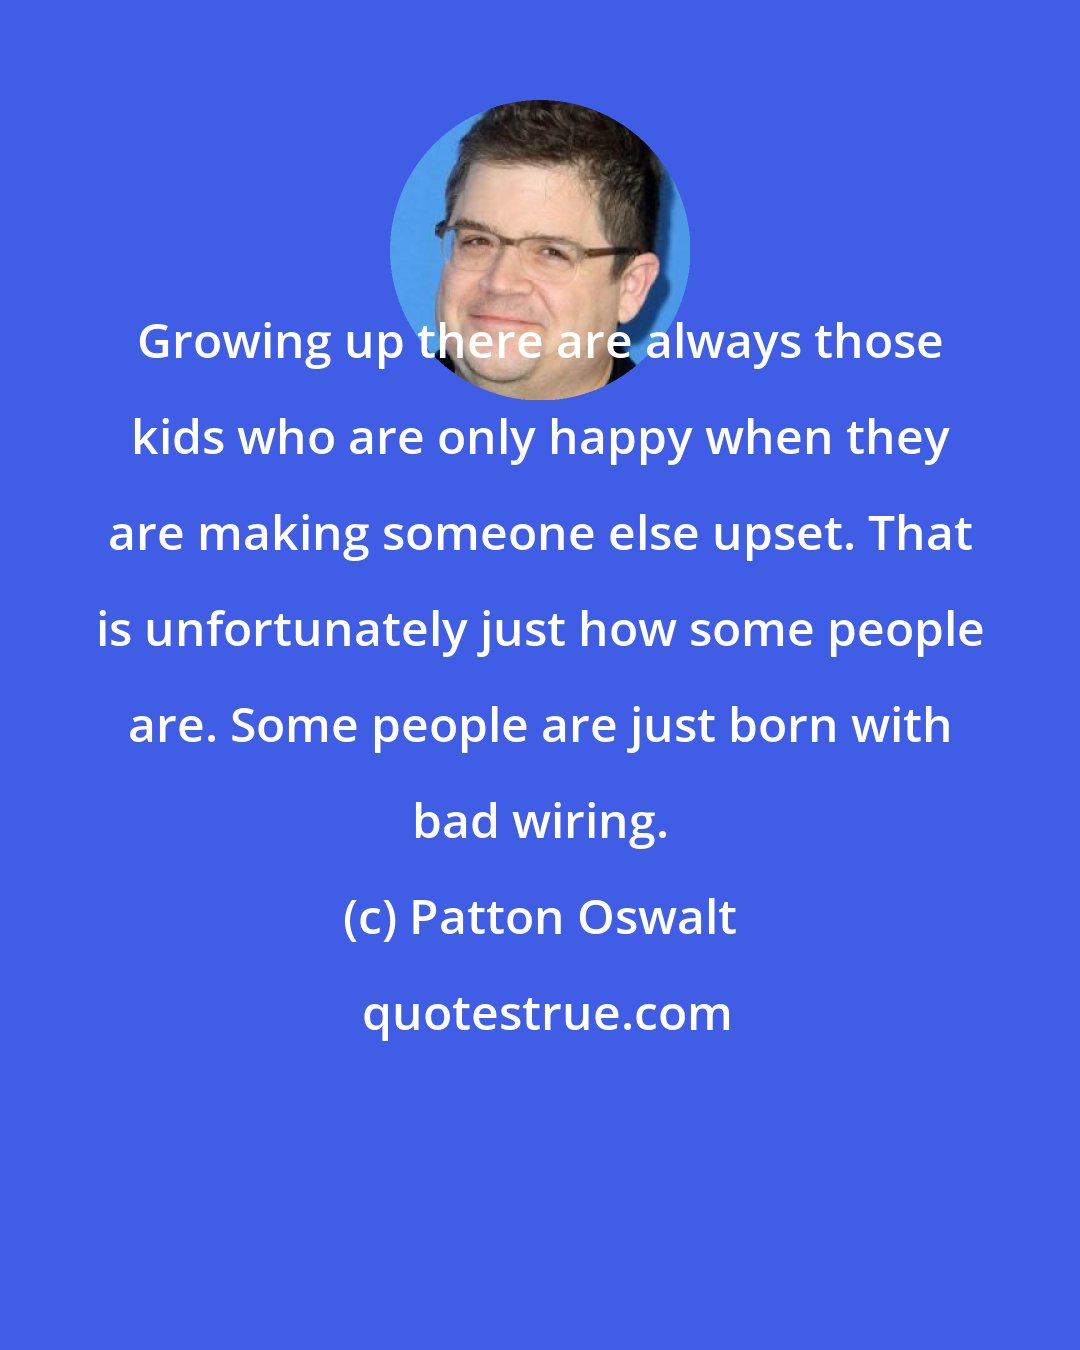 Patton Oswalt: Growing up there are always those kids who are only happy when they are making someone else upset. That is unfortunately just how some people are. Some people are just born with bad wiring.